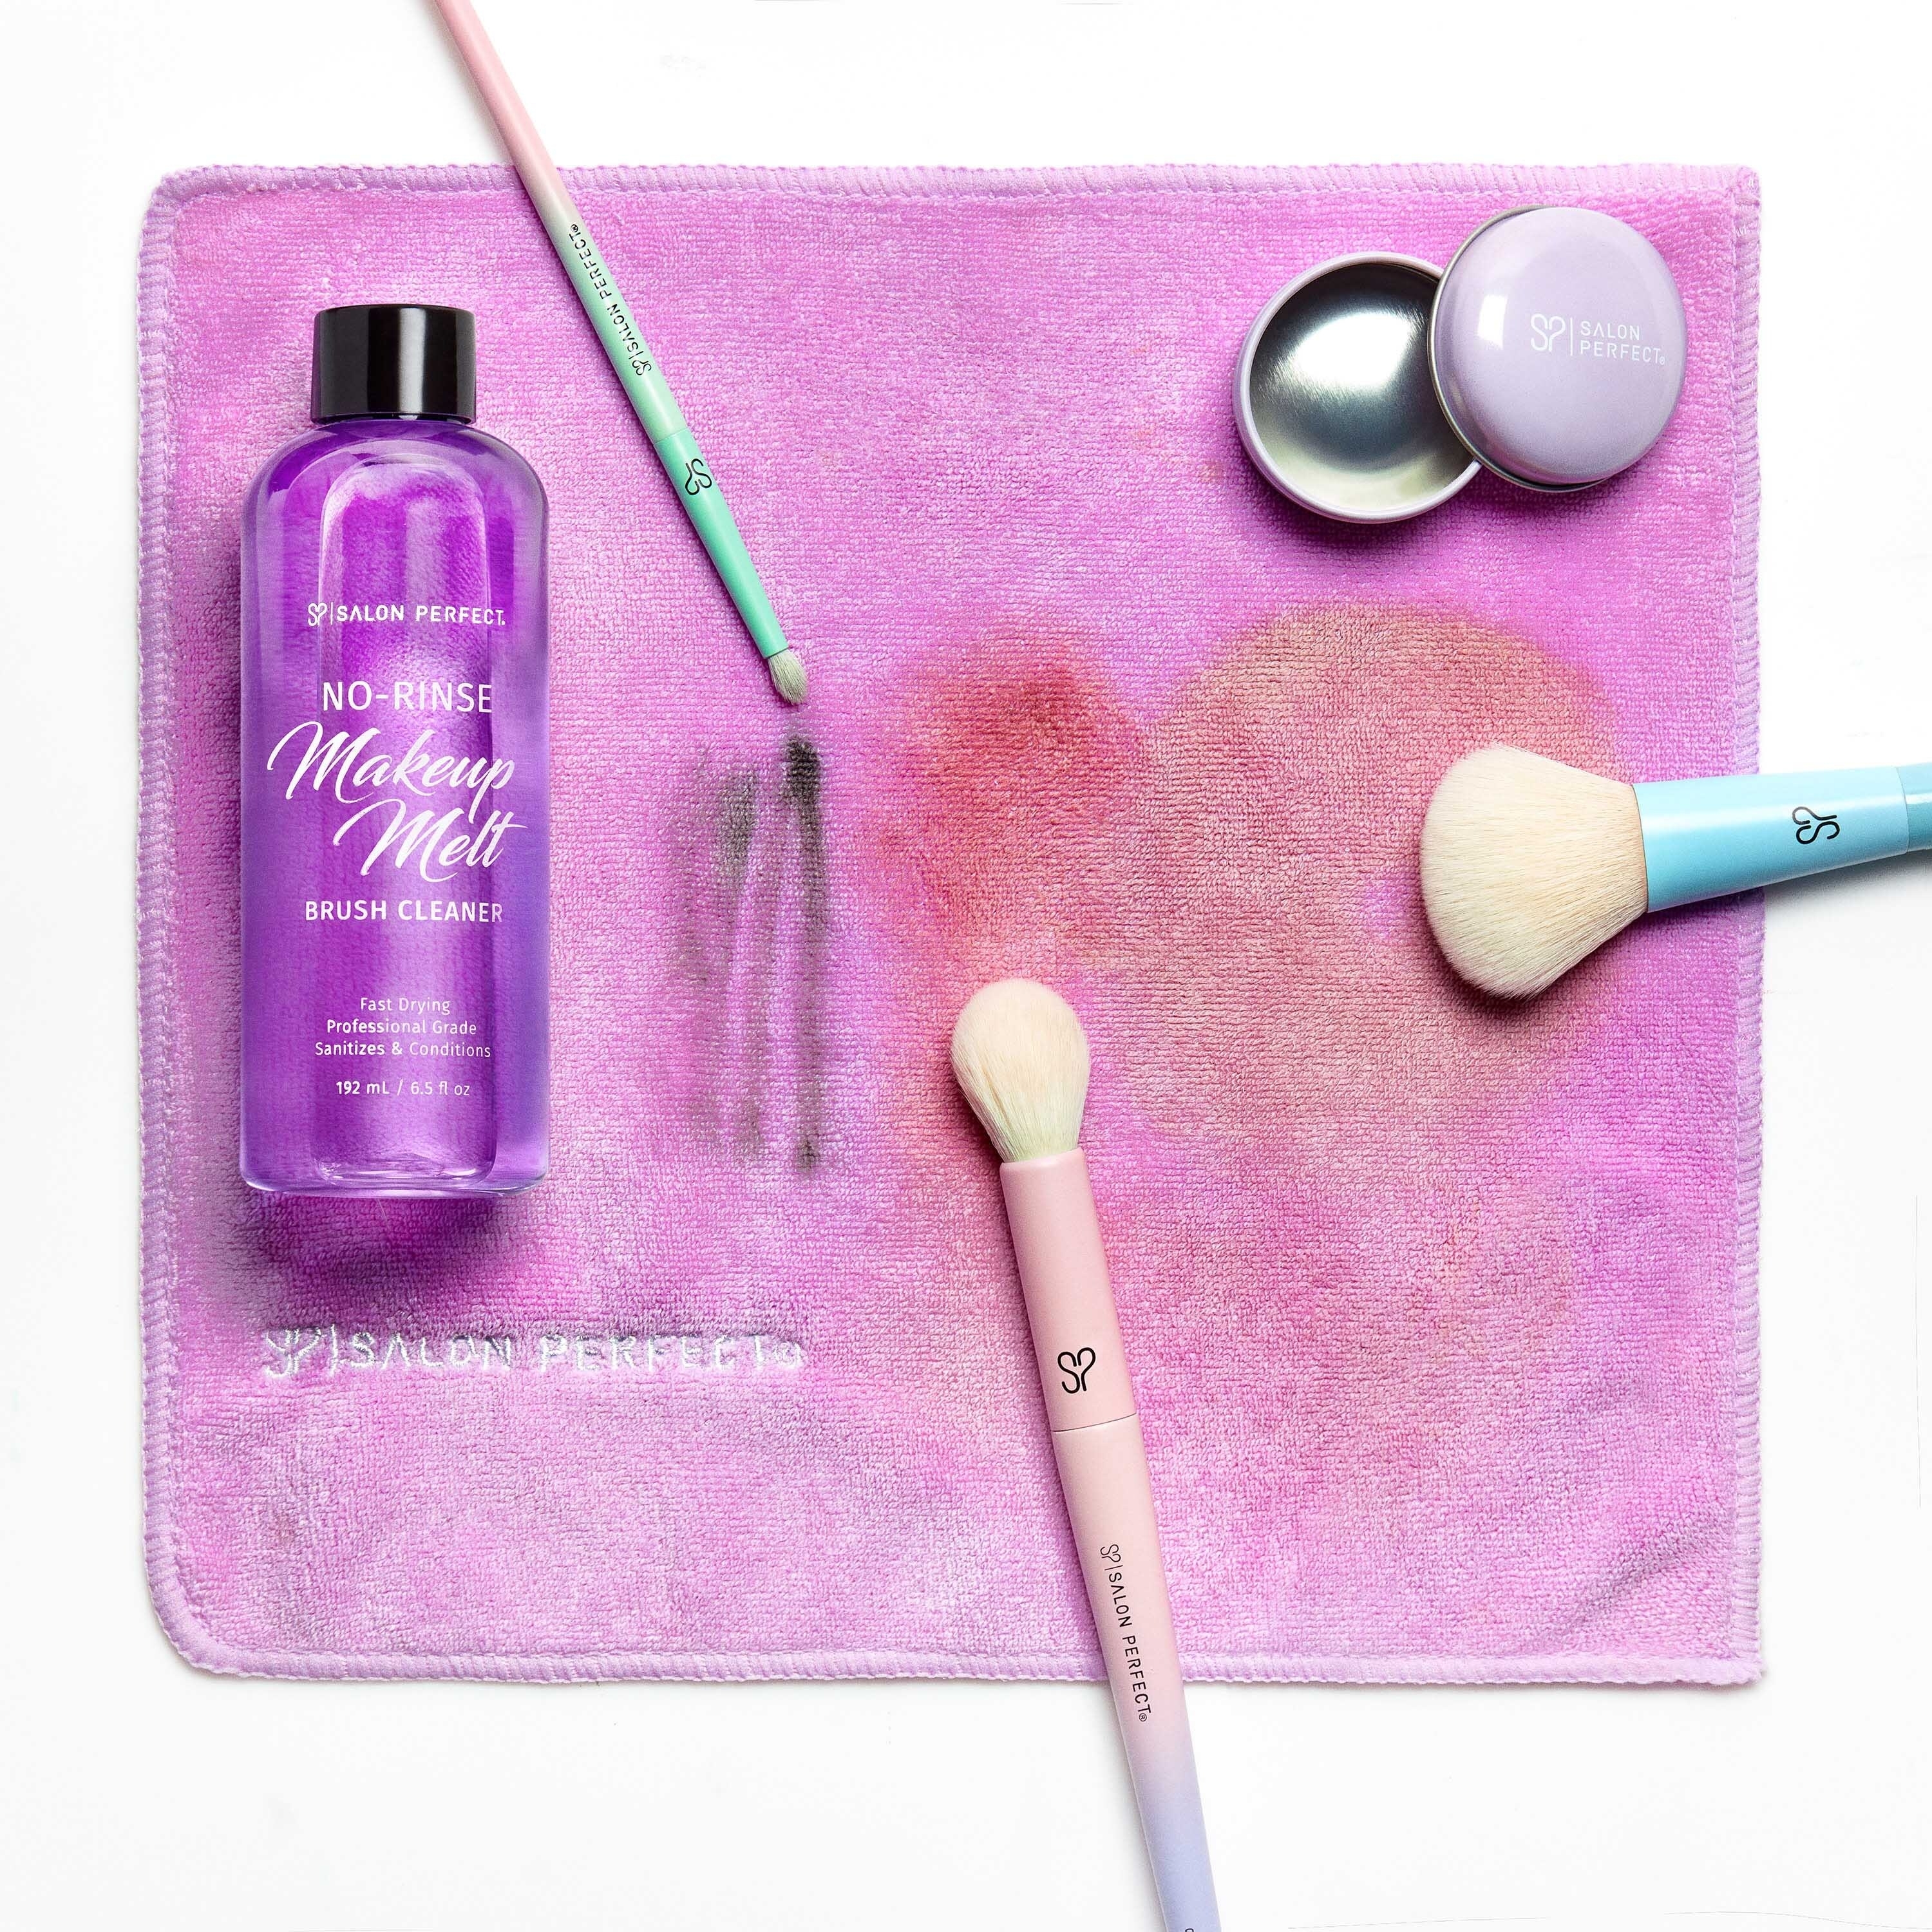 Makeup brush cleaner bottle, two brushes, and a sponge on a mat with a smudge mark